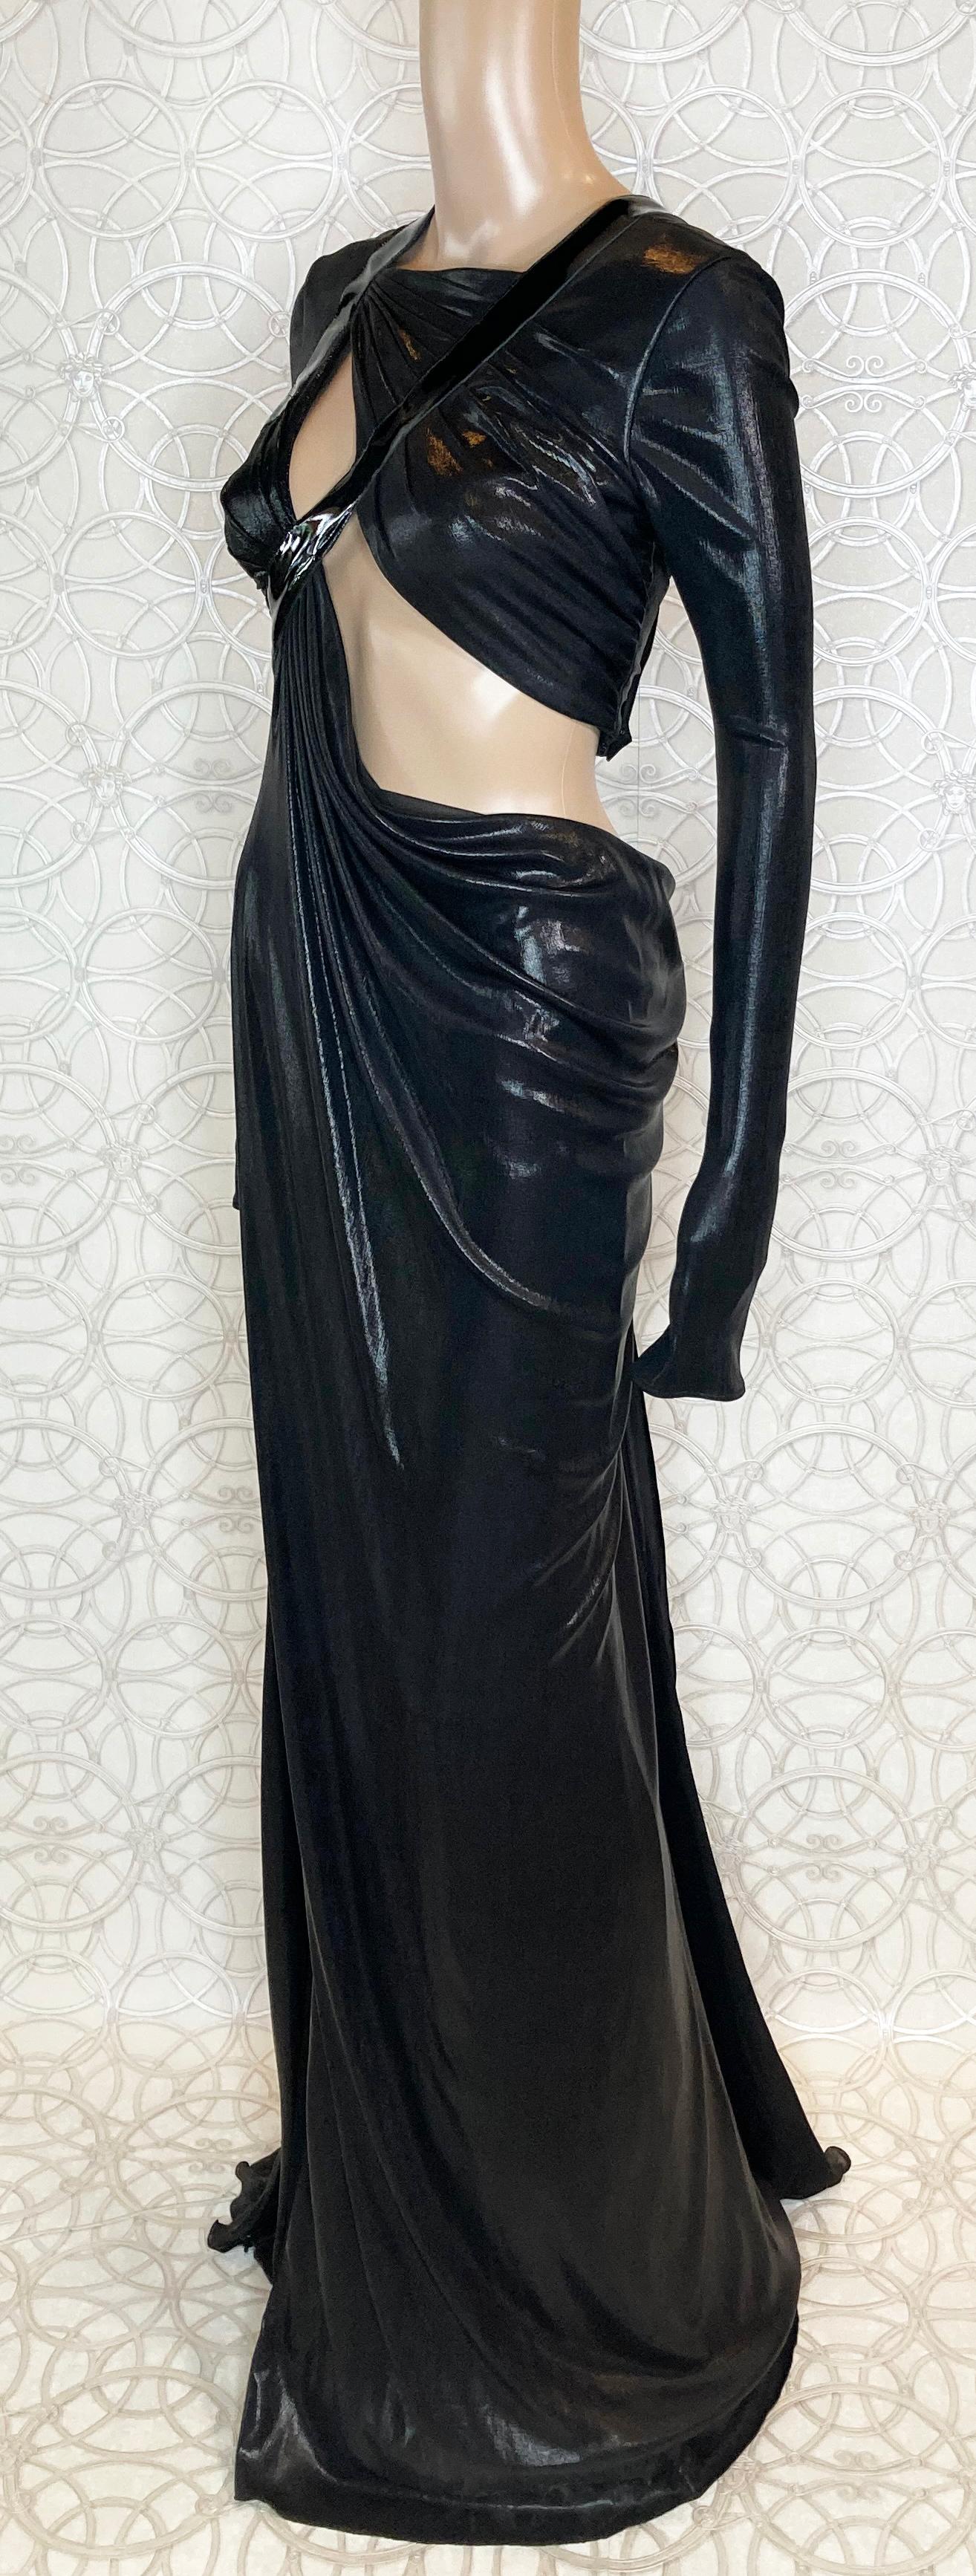 New VERSACE Hottest Black Liquid Jersey Gown With Vinyl Sleeves 2